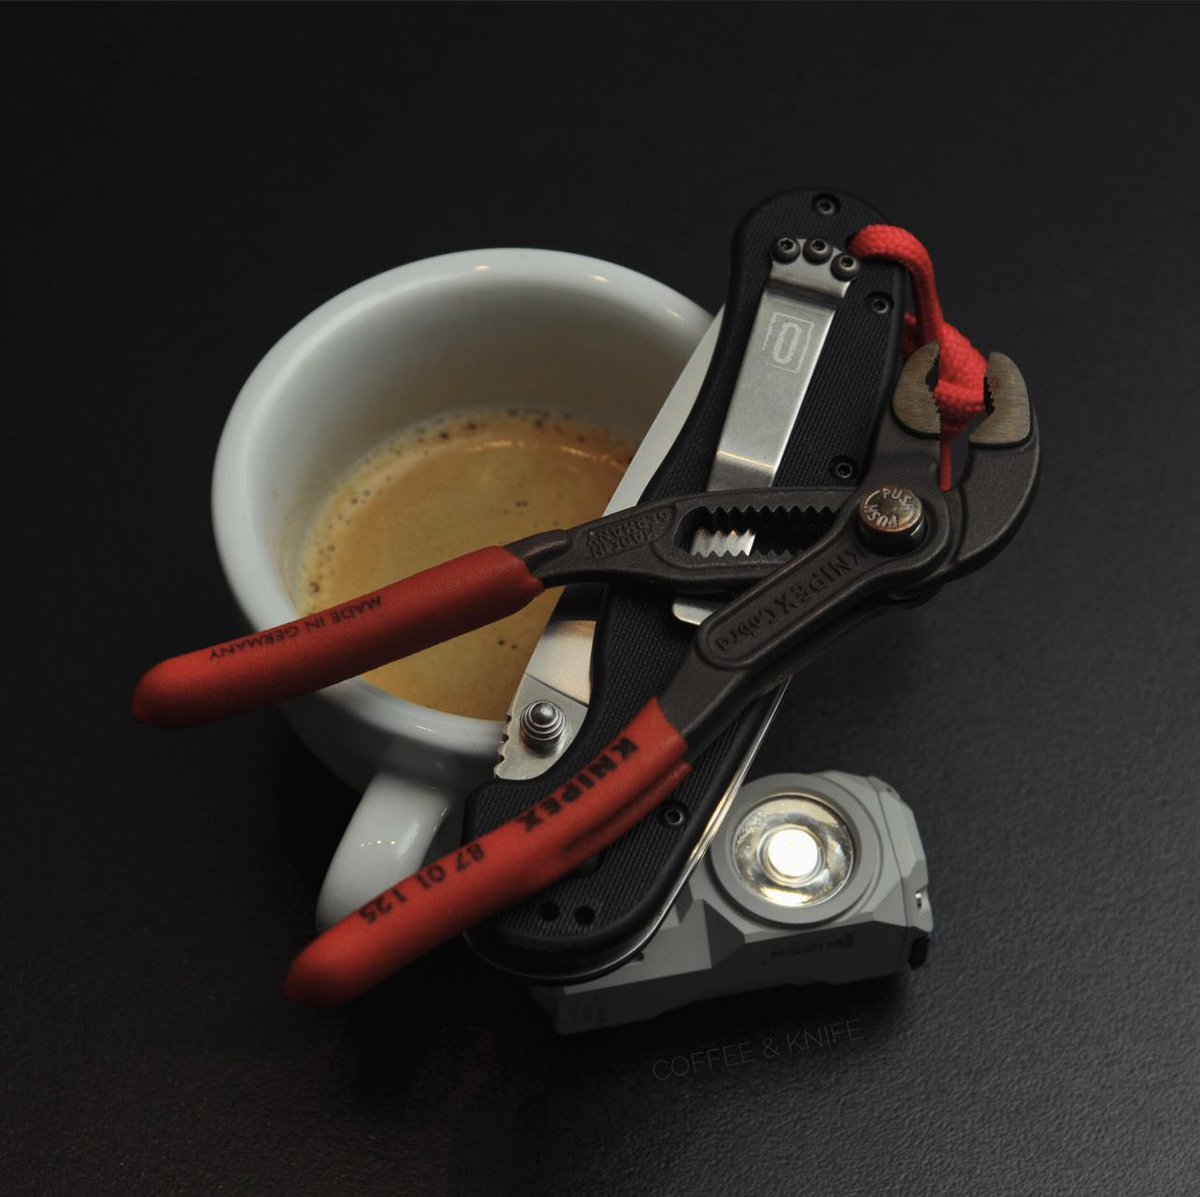 Coffee ☕️ Knife🔪Tools 🛠️ 
#UpgradeYourEDC 
#ontarioknifecompany #ontarioknife #ontarioknives #ontarioknifeco #OKC1889  #hunting #camping #hiking #outdoors #tools #gear #quality #bushcraft #survival #tactical #knife #blade #adventureculture #wildernessculture #knifelife